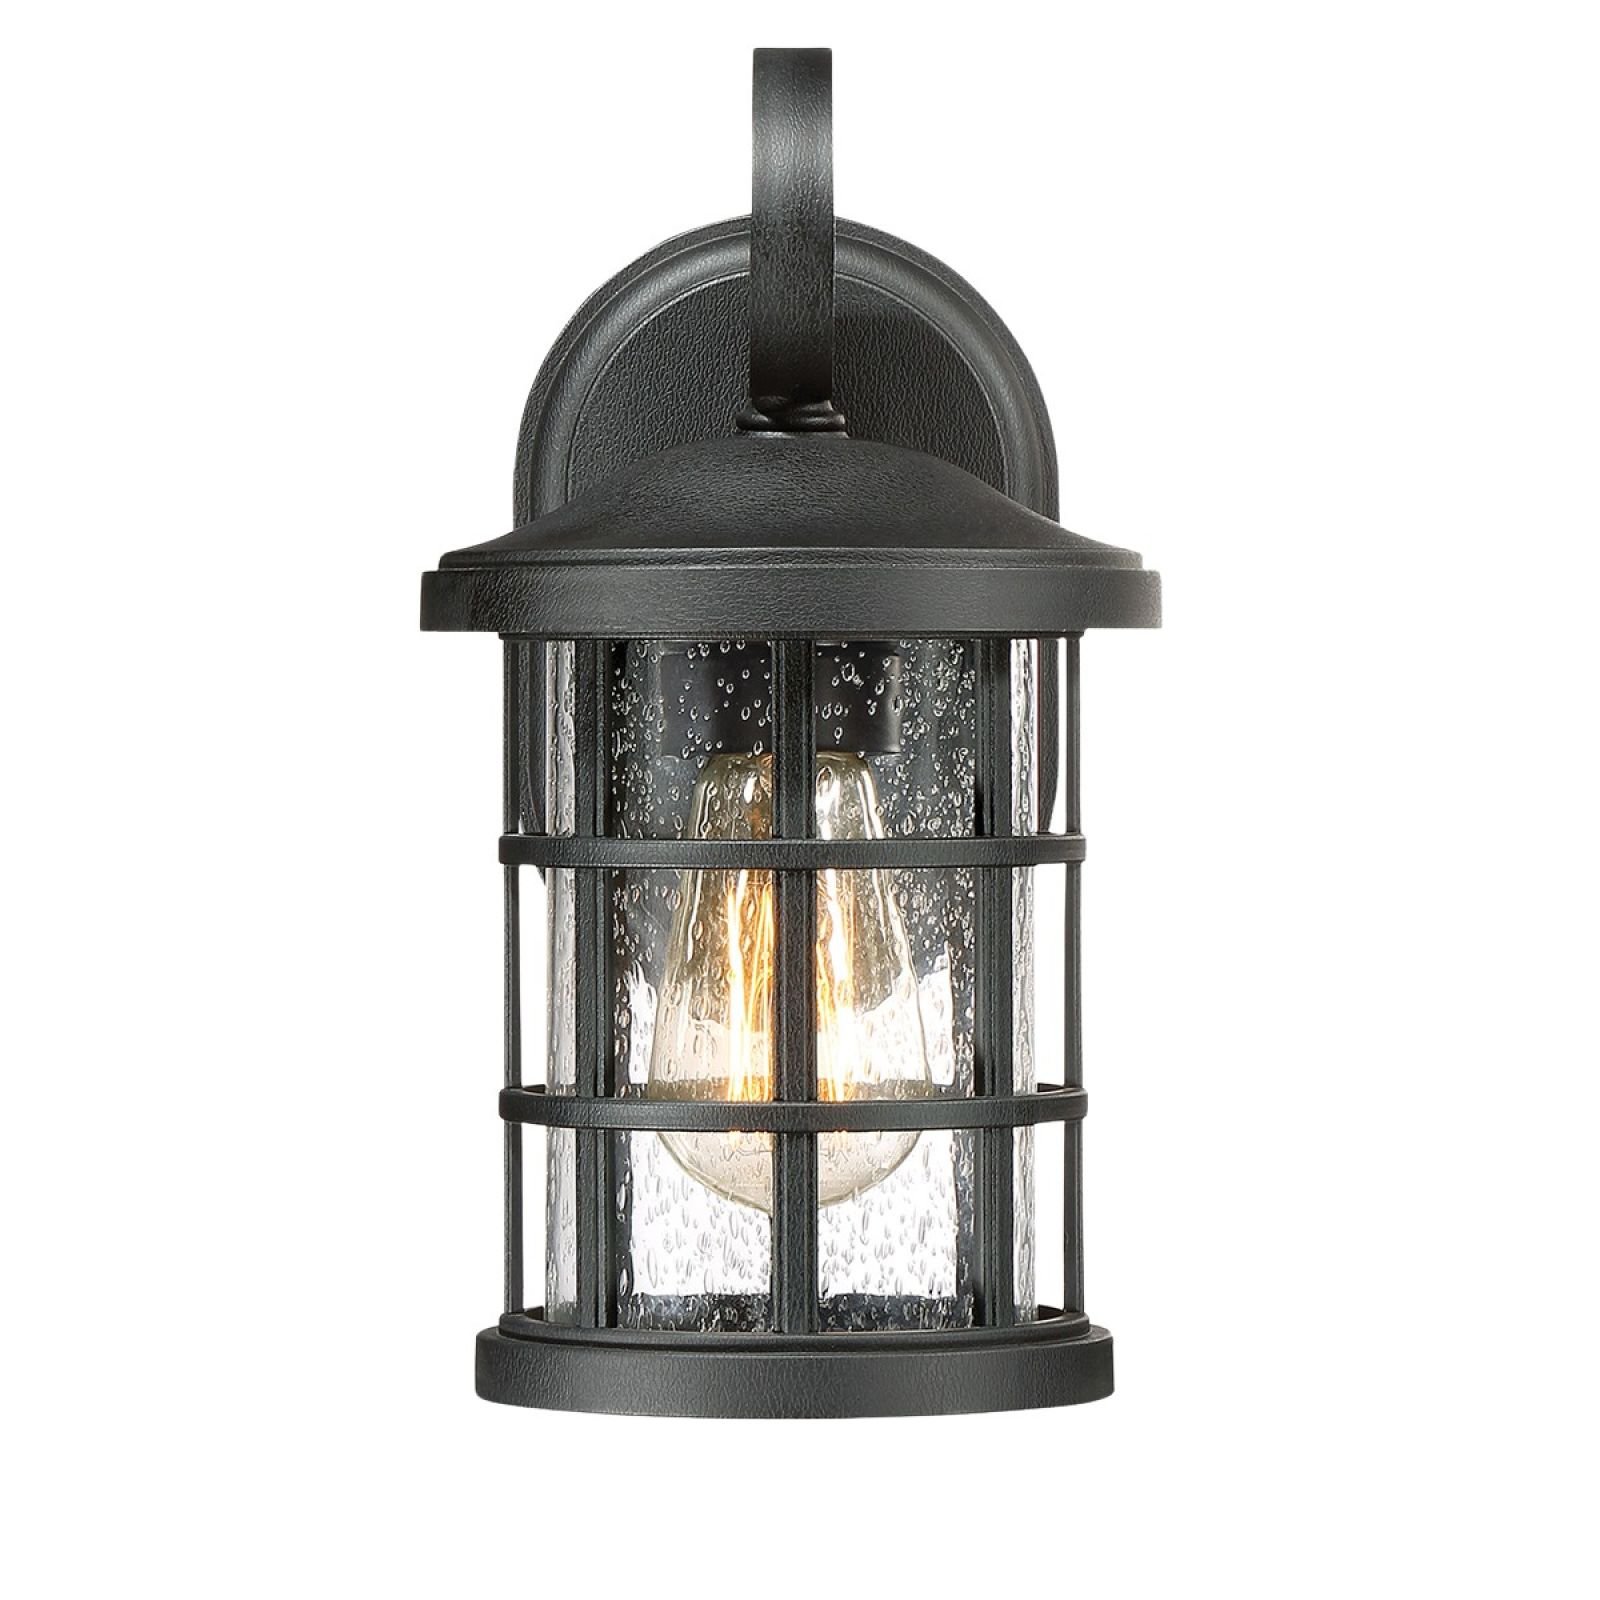 Crusader exterior wall lantern in Black in a choice of sizes